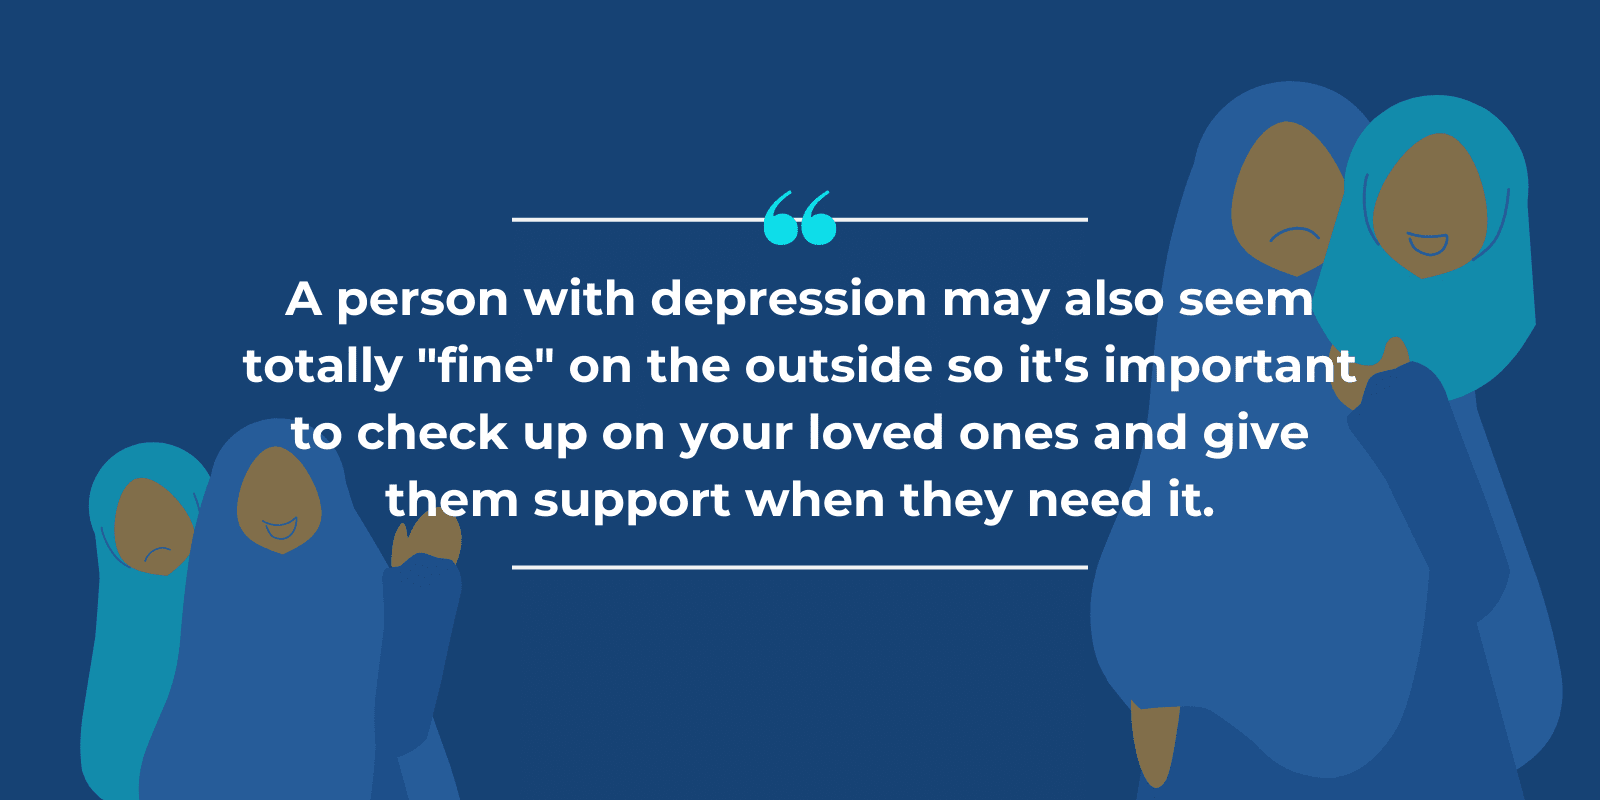 "A person with depression may also seem totally "fine" on the outside so it's important to check up on your loved ones and give them support when they need it." written above digital illustration of a girl wearing hijab pretending that she's ok outside